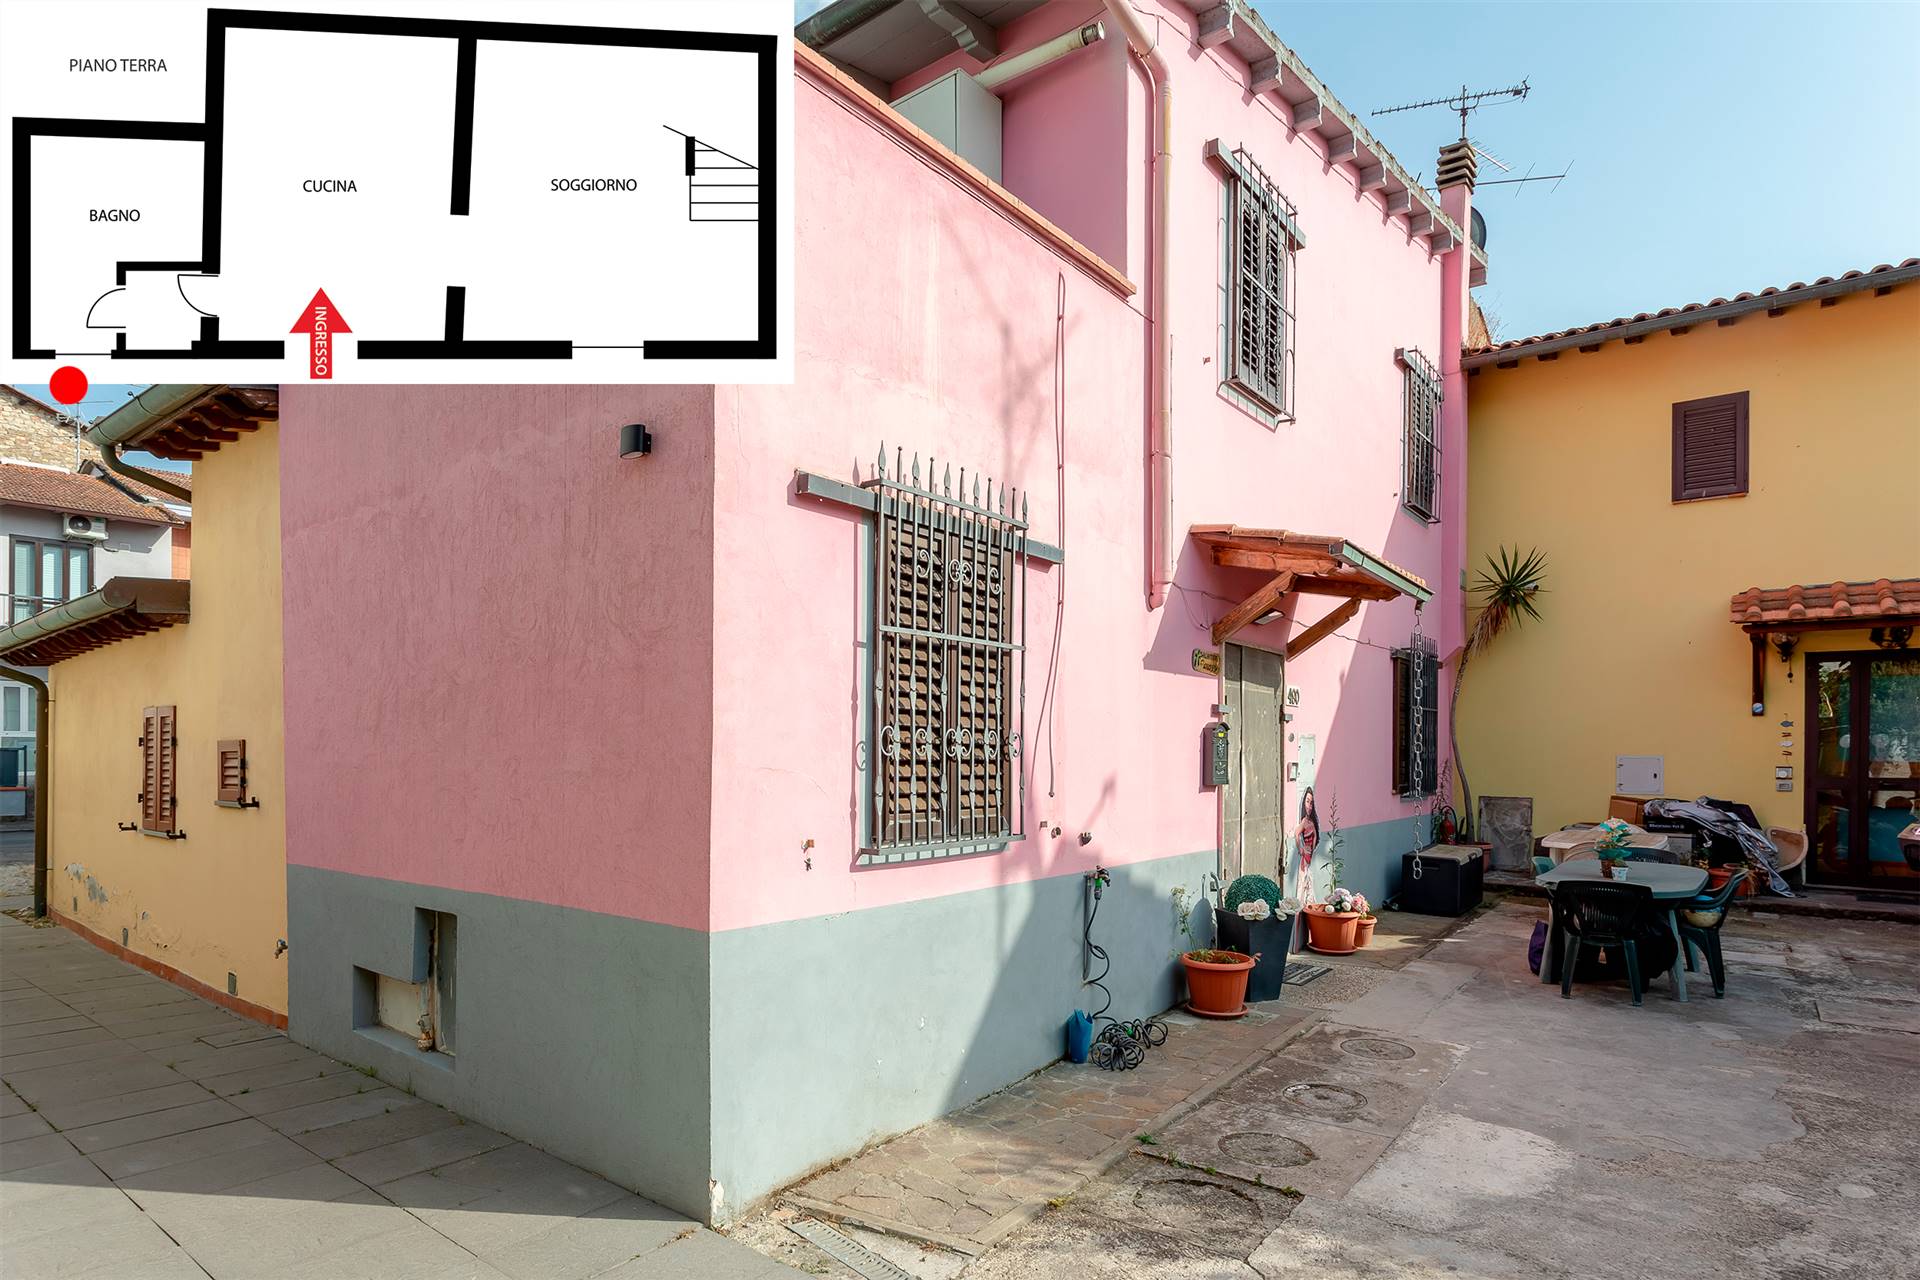 SAN GIORGIO A COLONICA, PRATO, Terraced house for sale of 101 Sq. mt., Excellent Condition, Heating Individual heating system, Energetic class: G, placed at Ground on 1, composed by: 4.5 Rooms, 